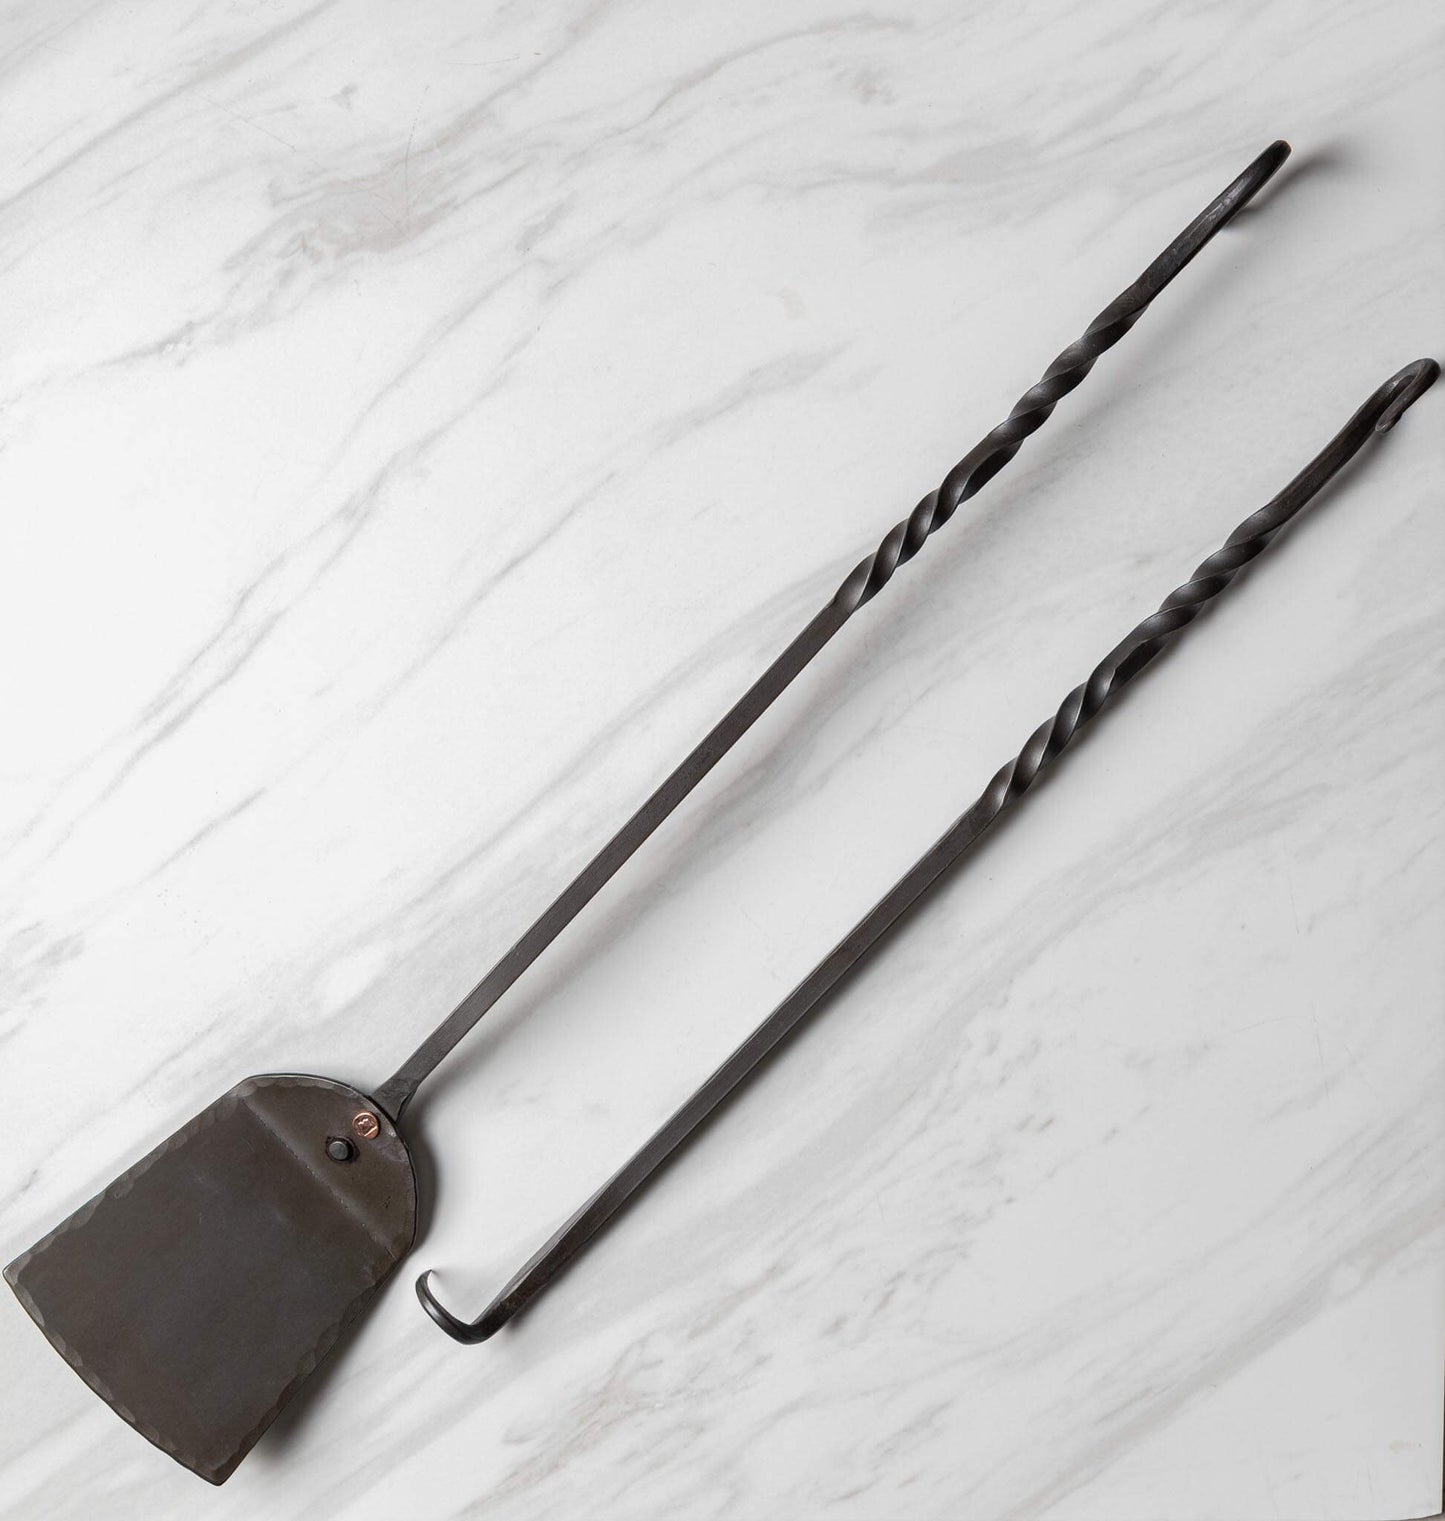 Grill Master Spatula and Steak Flipper Set - Hand Forged